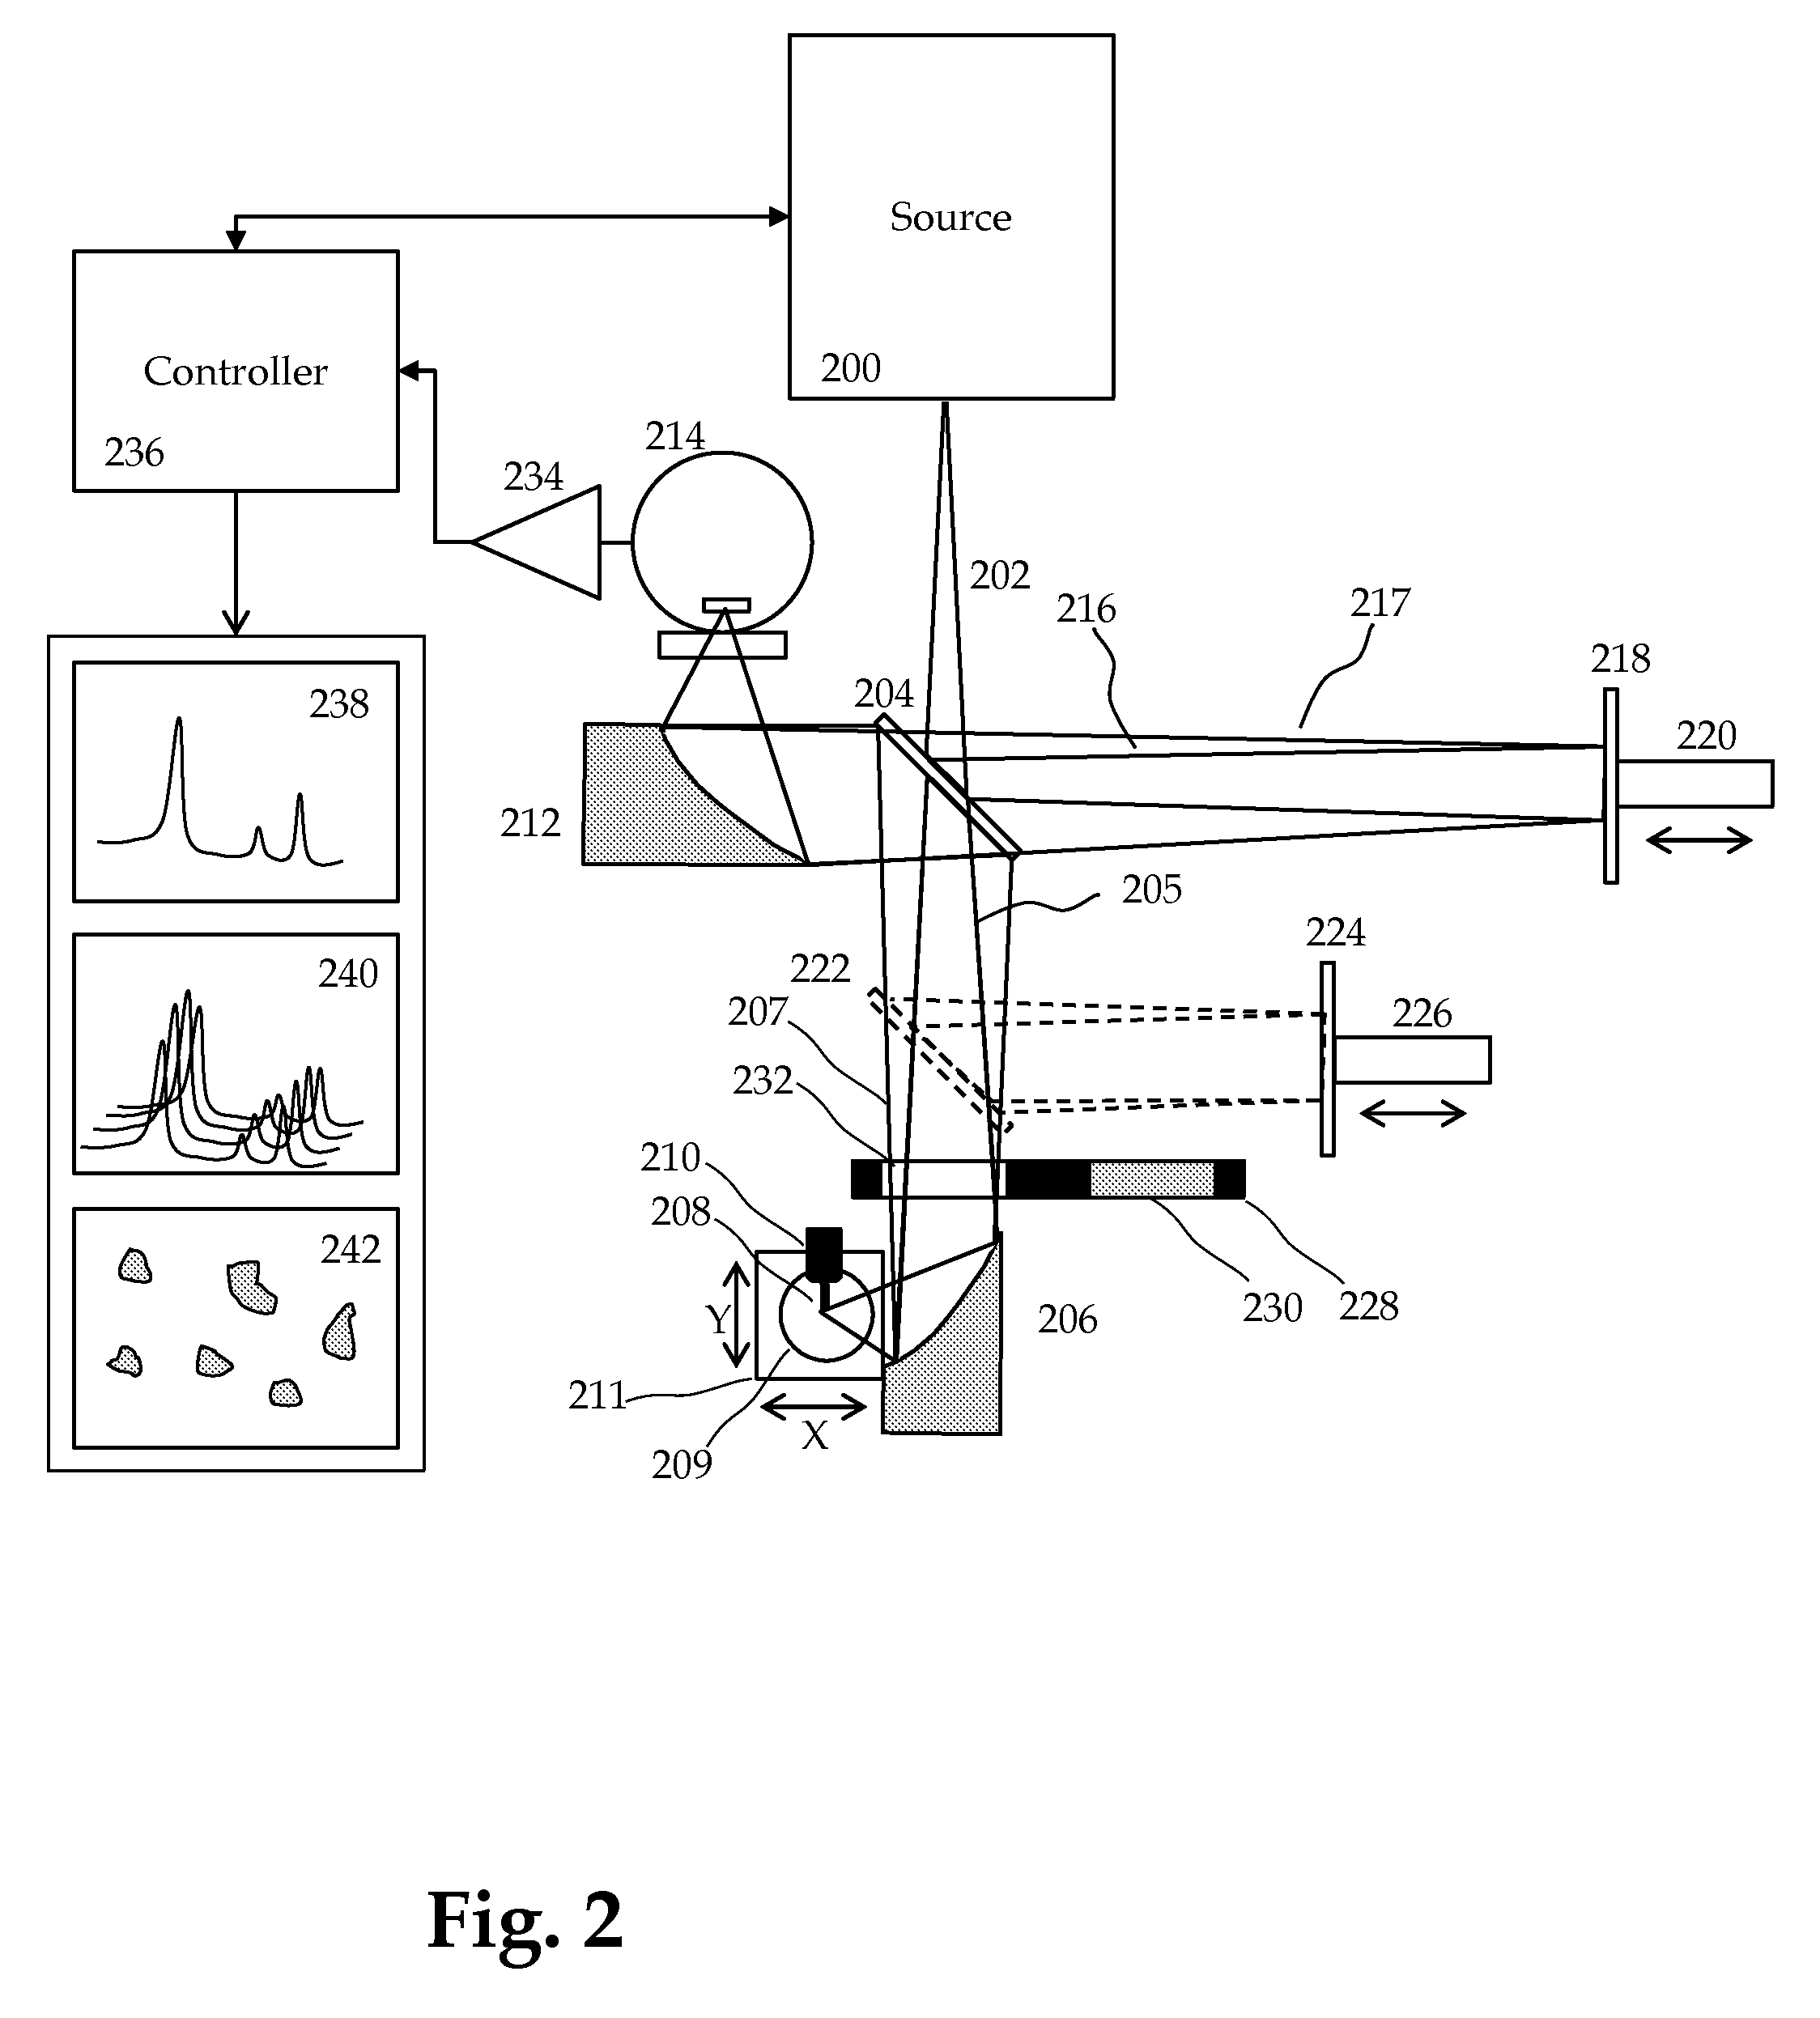 Method and Apparatus for Infrared Scattering Scanning Near-field Optical Microscopy with High Speed Point Spectroscopy